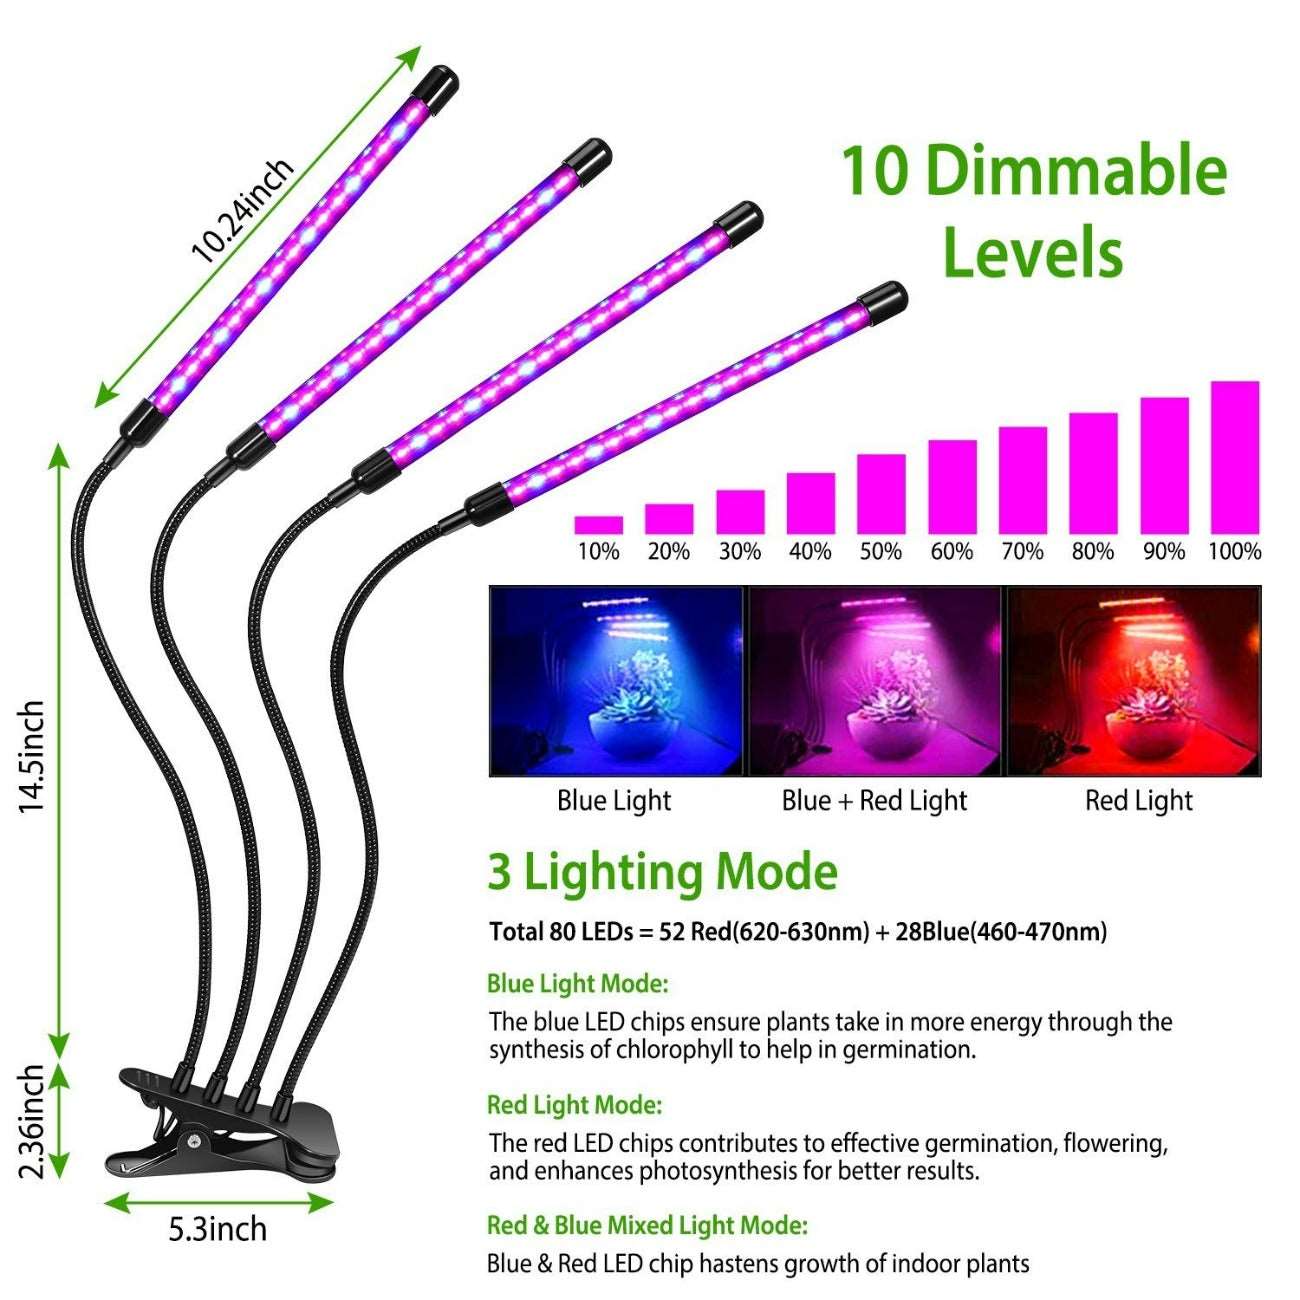 Dimmable Grow Lights for Indoor Plants